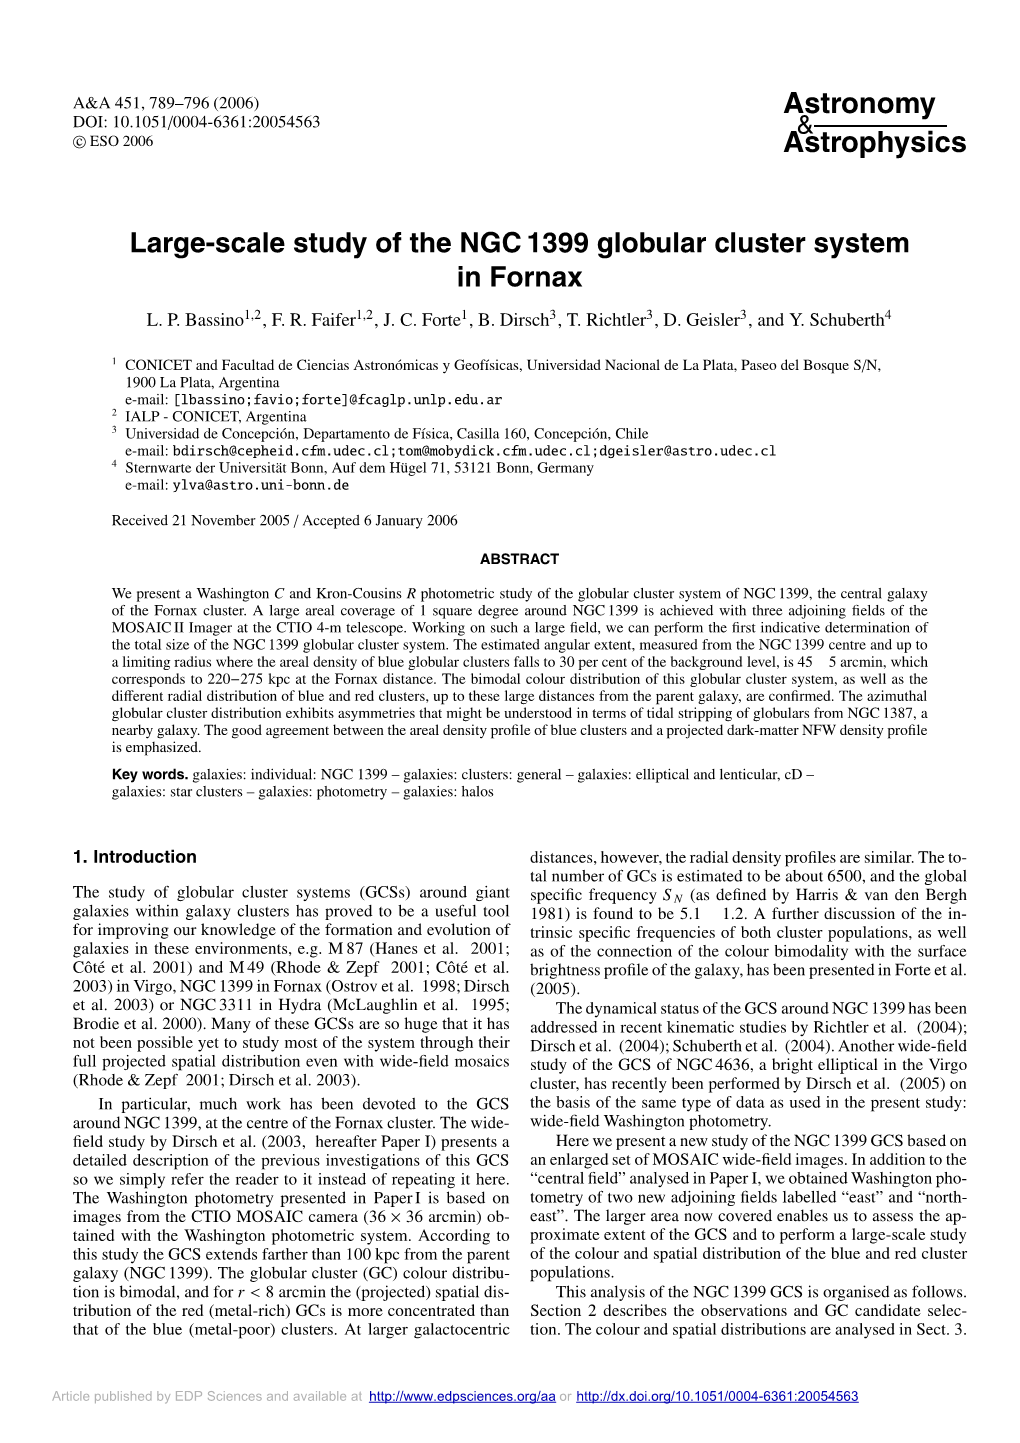 Large-Scale Study of the NGC 1399 Globular Cluster System in Fornax